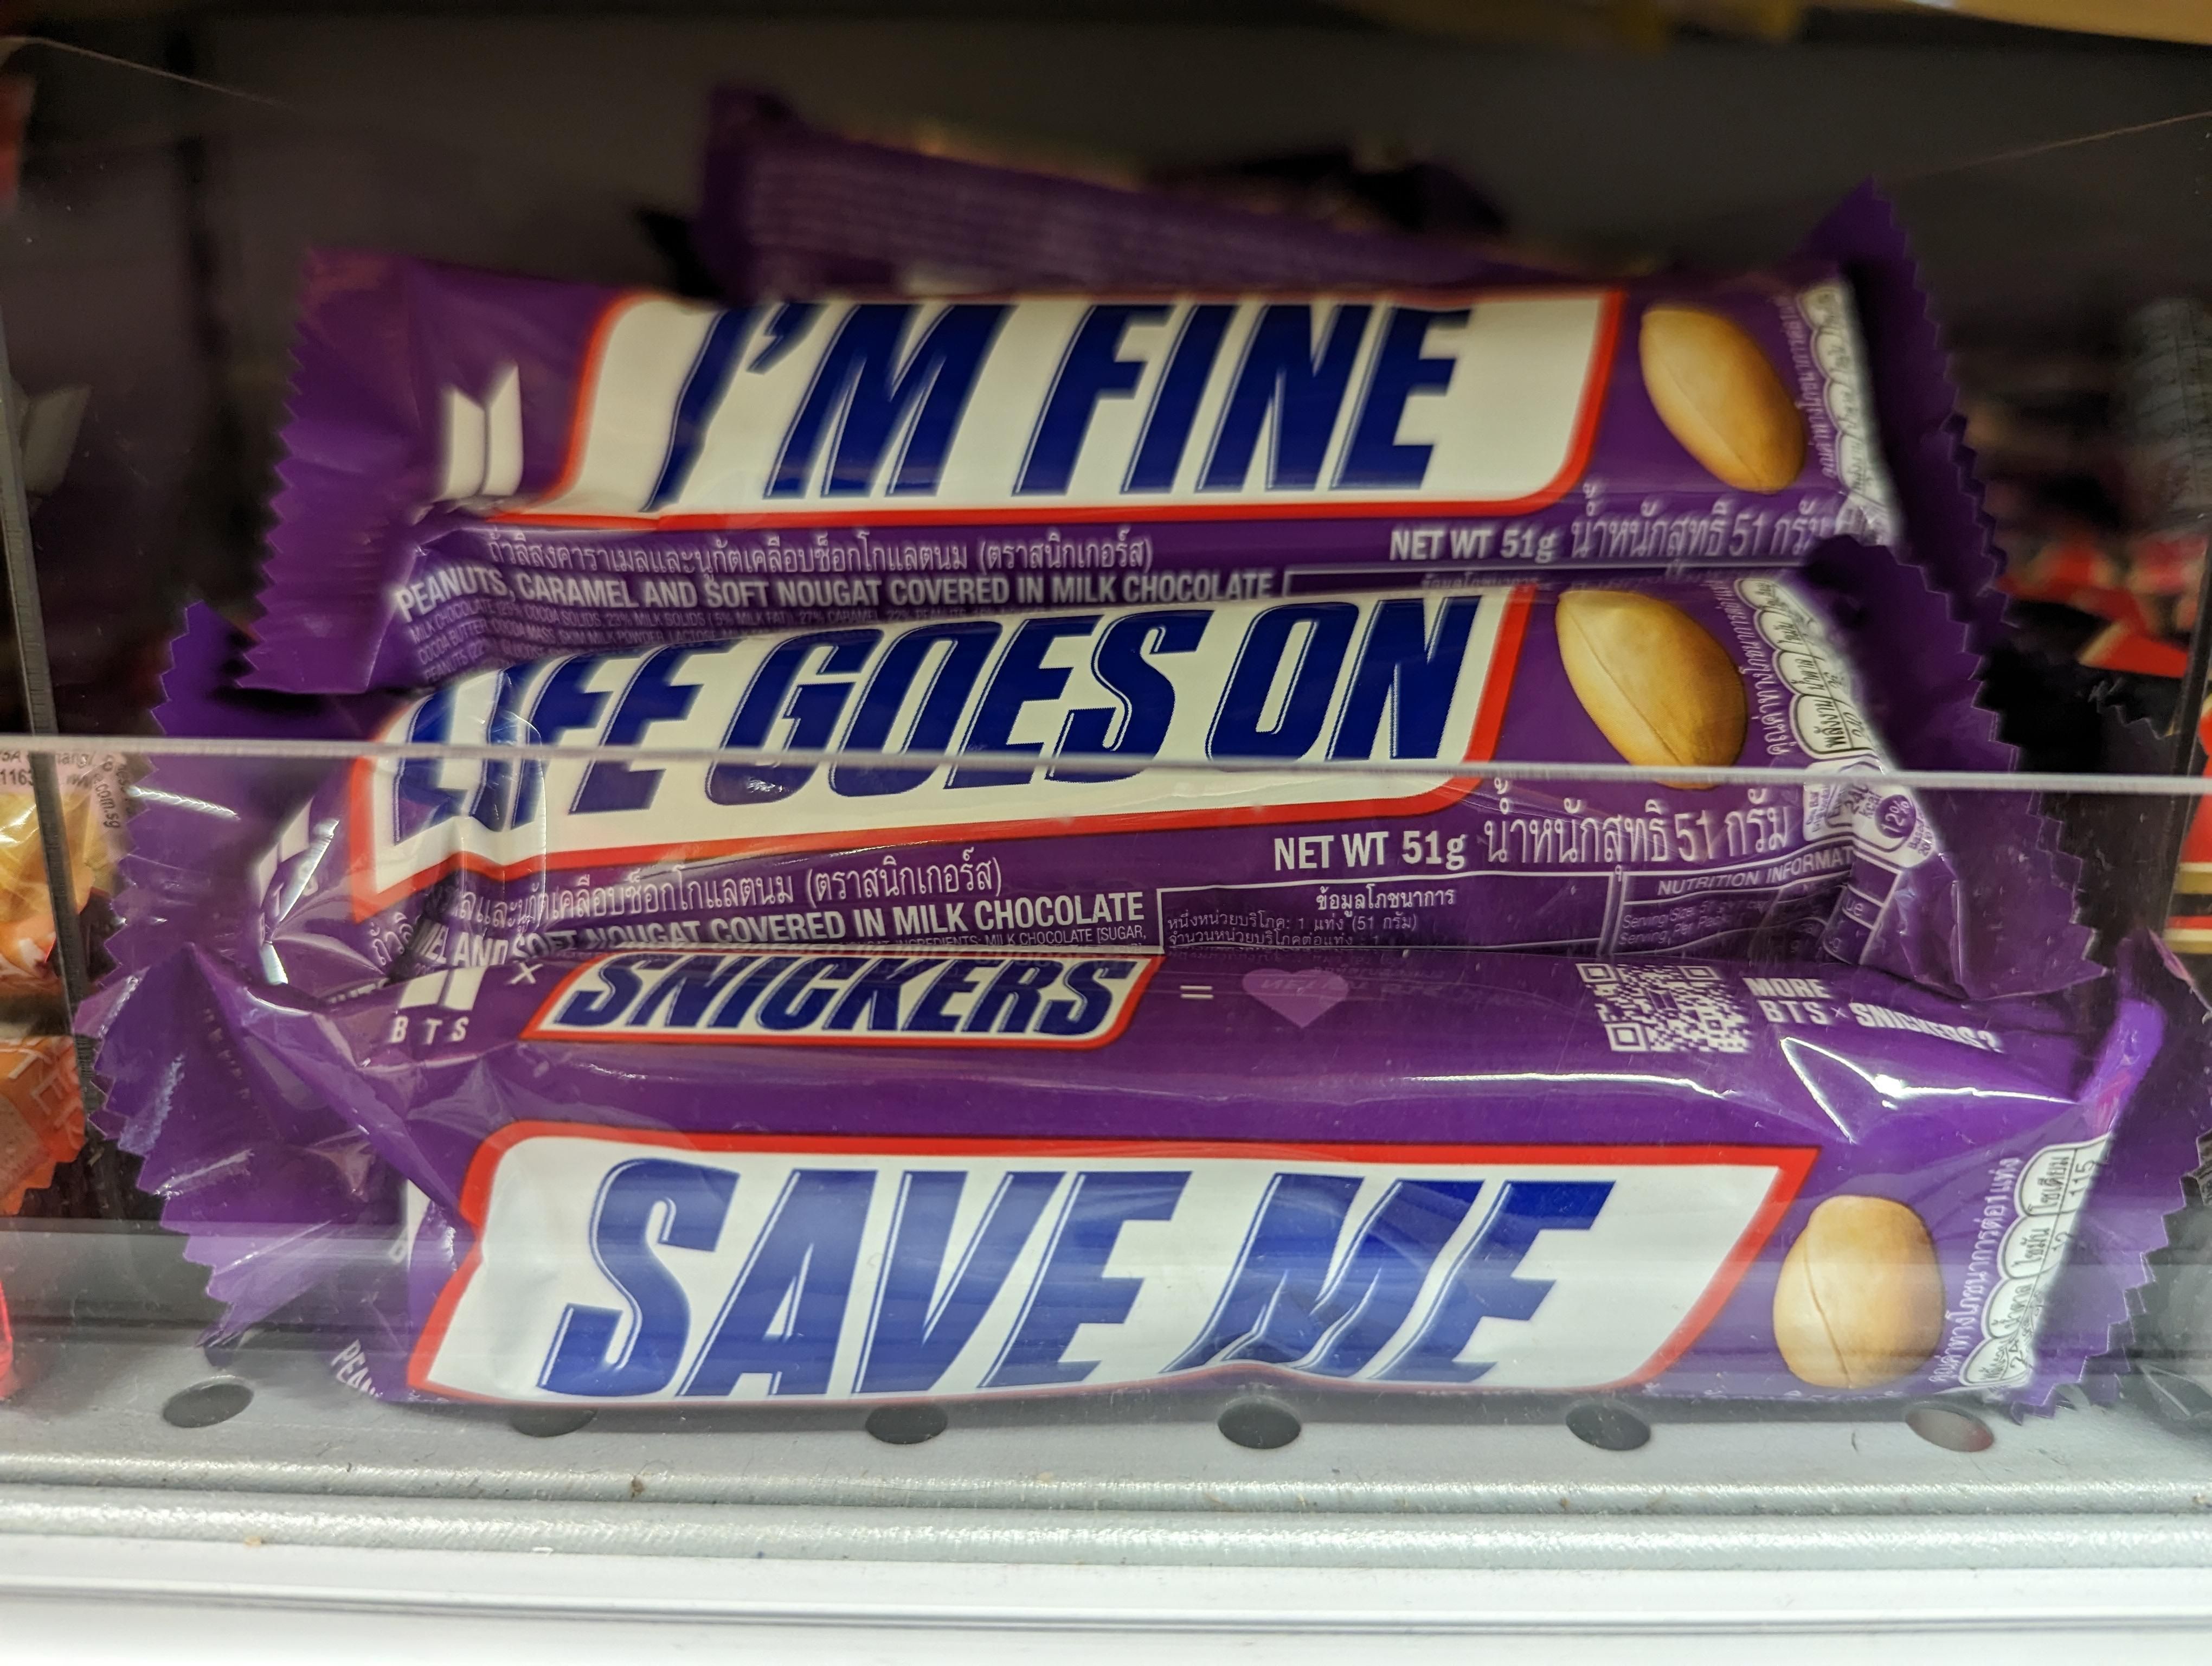 Are you okay Snickers? Do you want to talk?